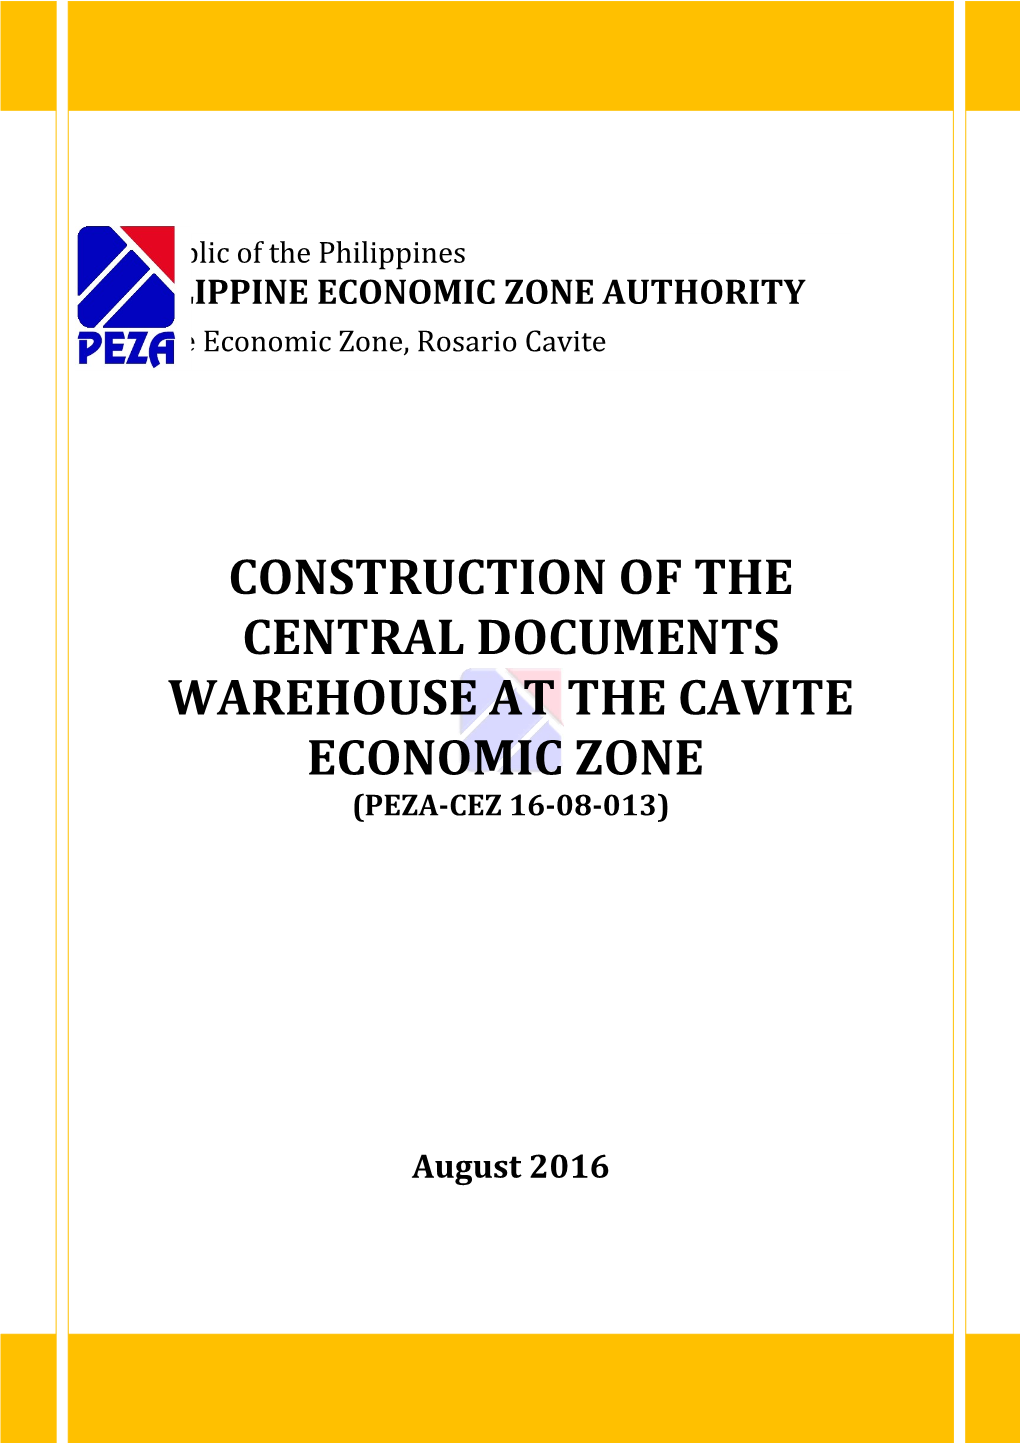 Construction of the Central Documents Warehouse at the Cavite Economic Zone